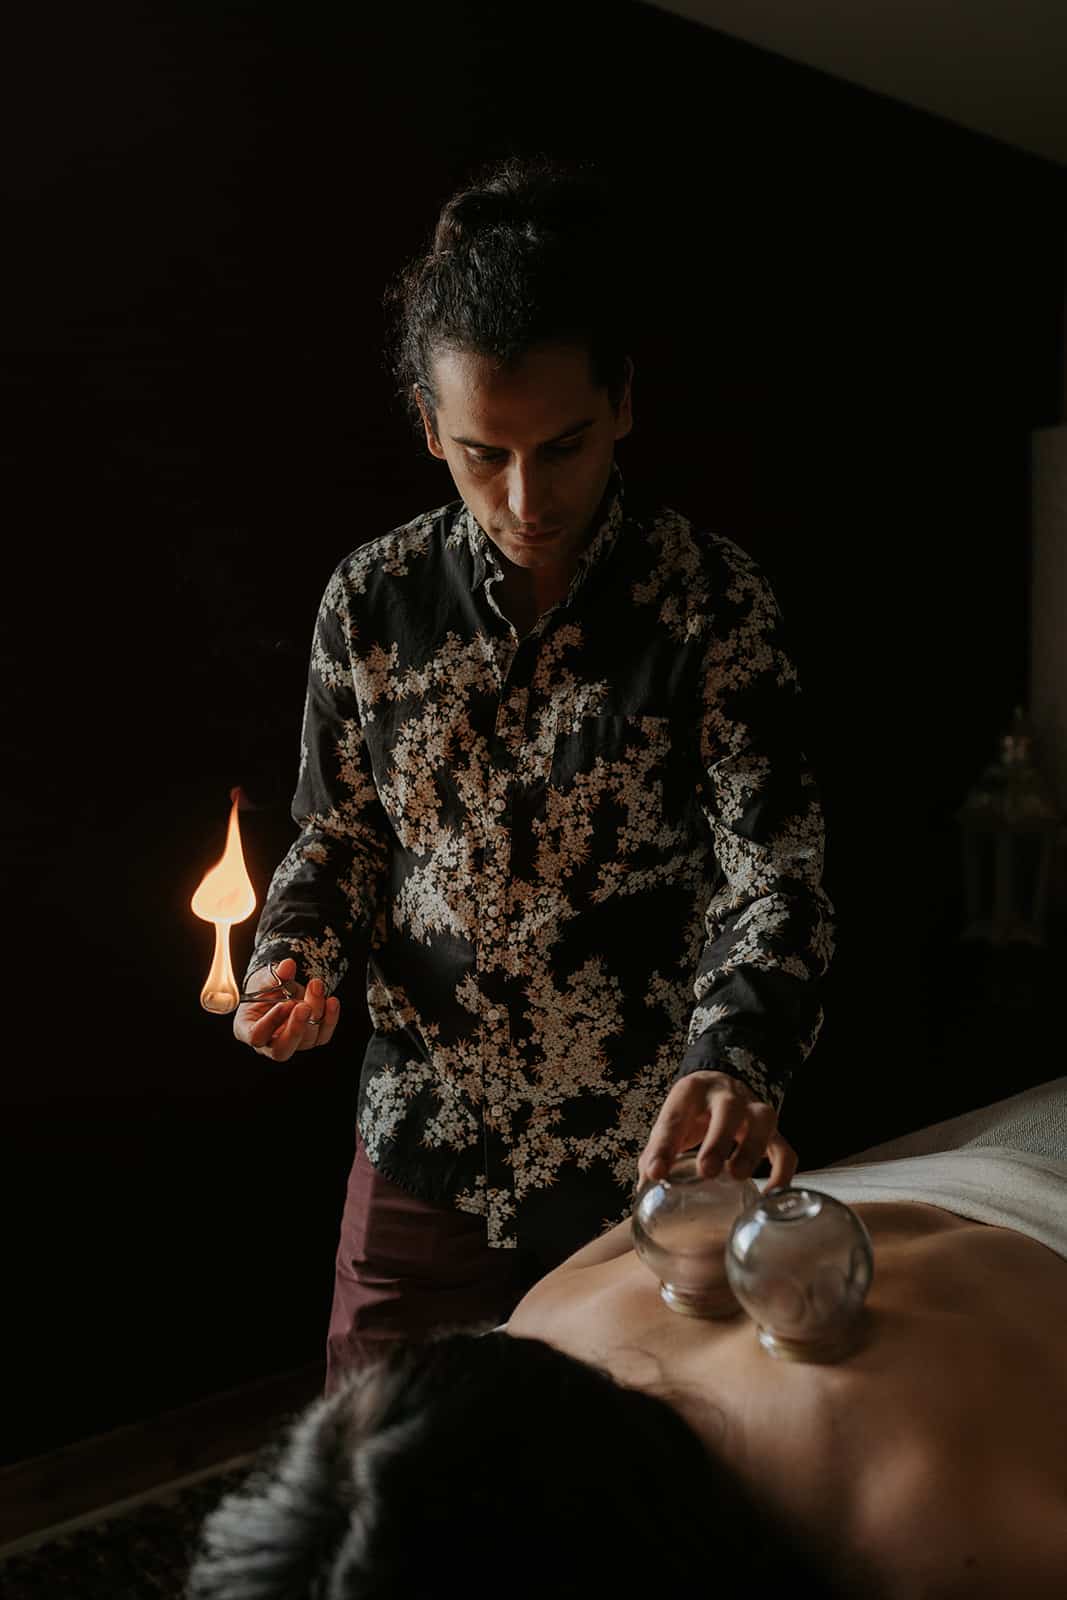 Practitioner igniting fire for cupping therapy to enhance fertility, showcasing the integration of TCM techniques.